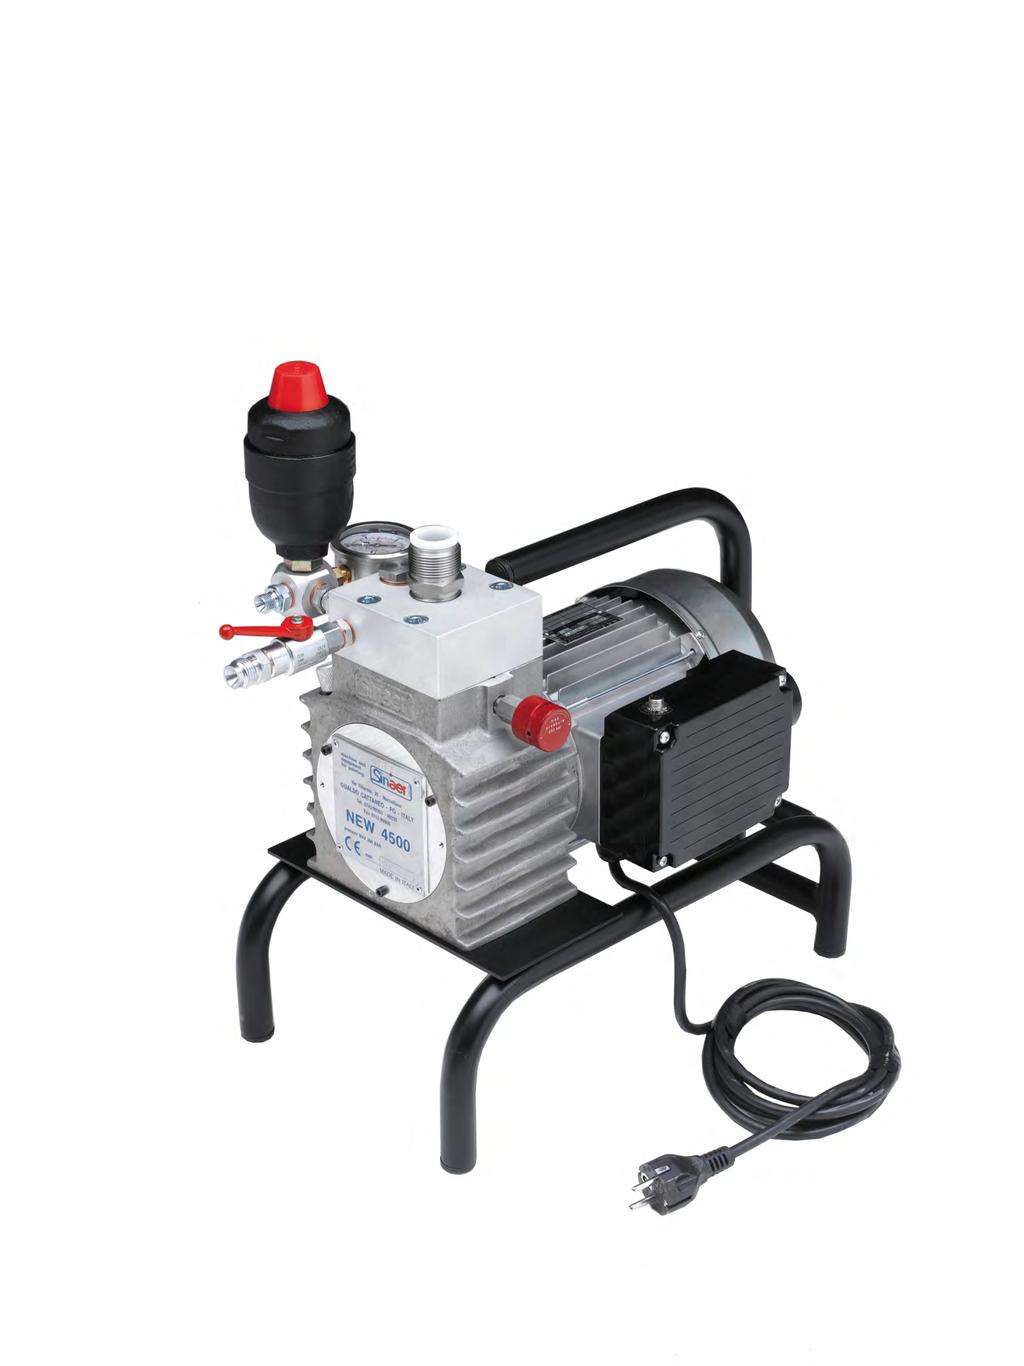 NEW 4500 Airless diaphragm sprayer with electric motor TECHNICAL FEATURES: Flow rate: 4 lt./min.